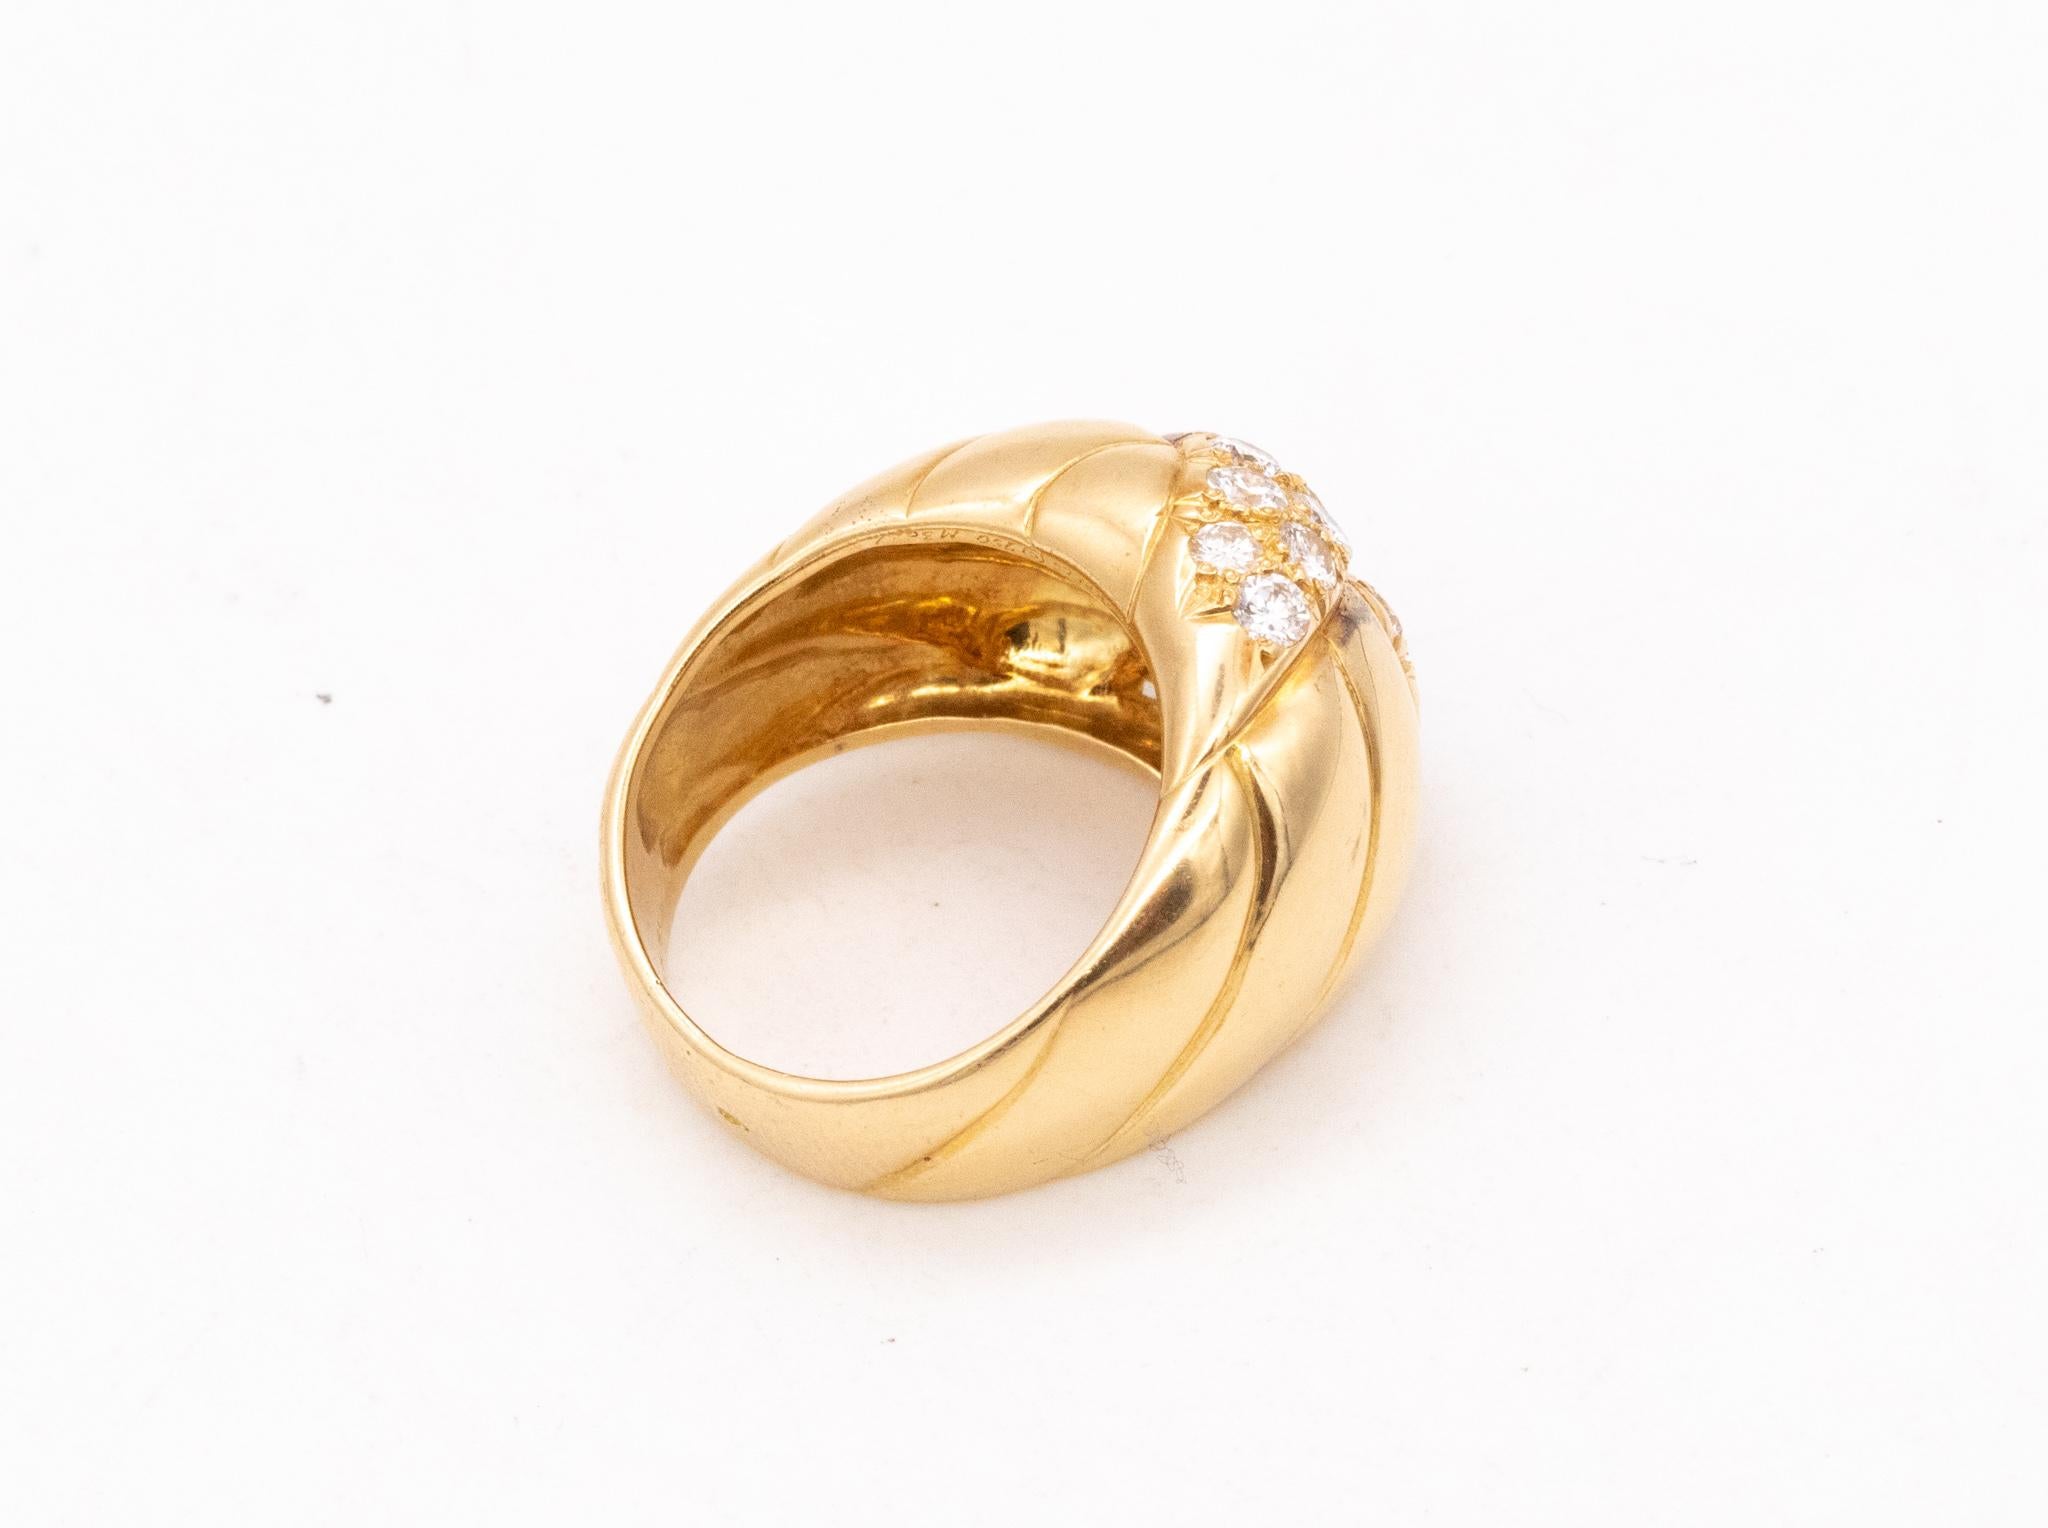 Van Cleef Arpels 1970 Paris Bombe Cocktail Ring 18Kt Gold 1.26 Cts VVS Diamonds In Excellent Condition For Sale In Miami, FL